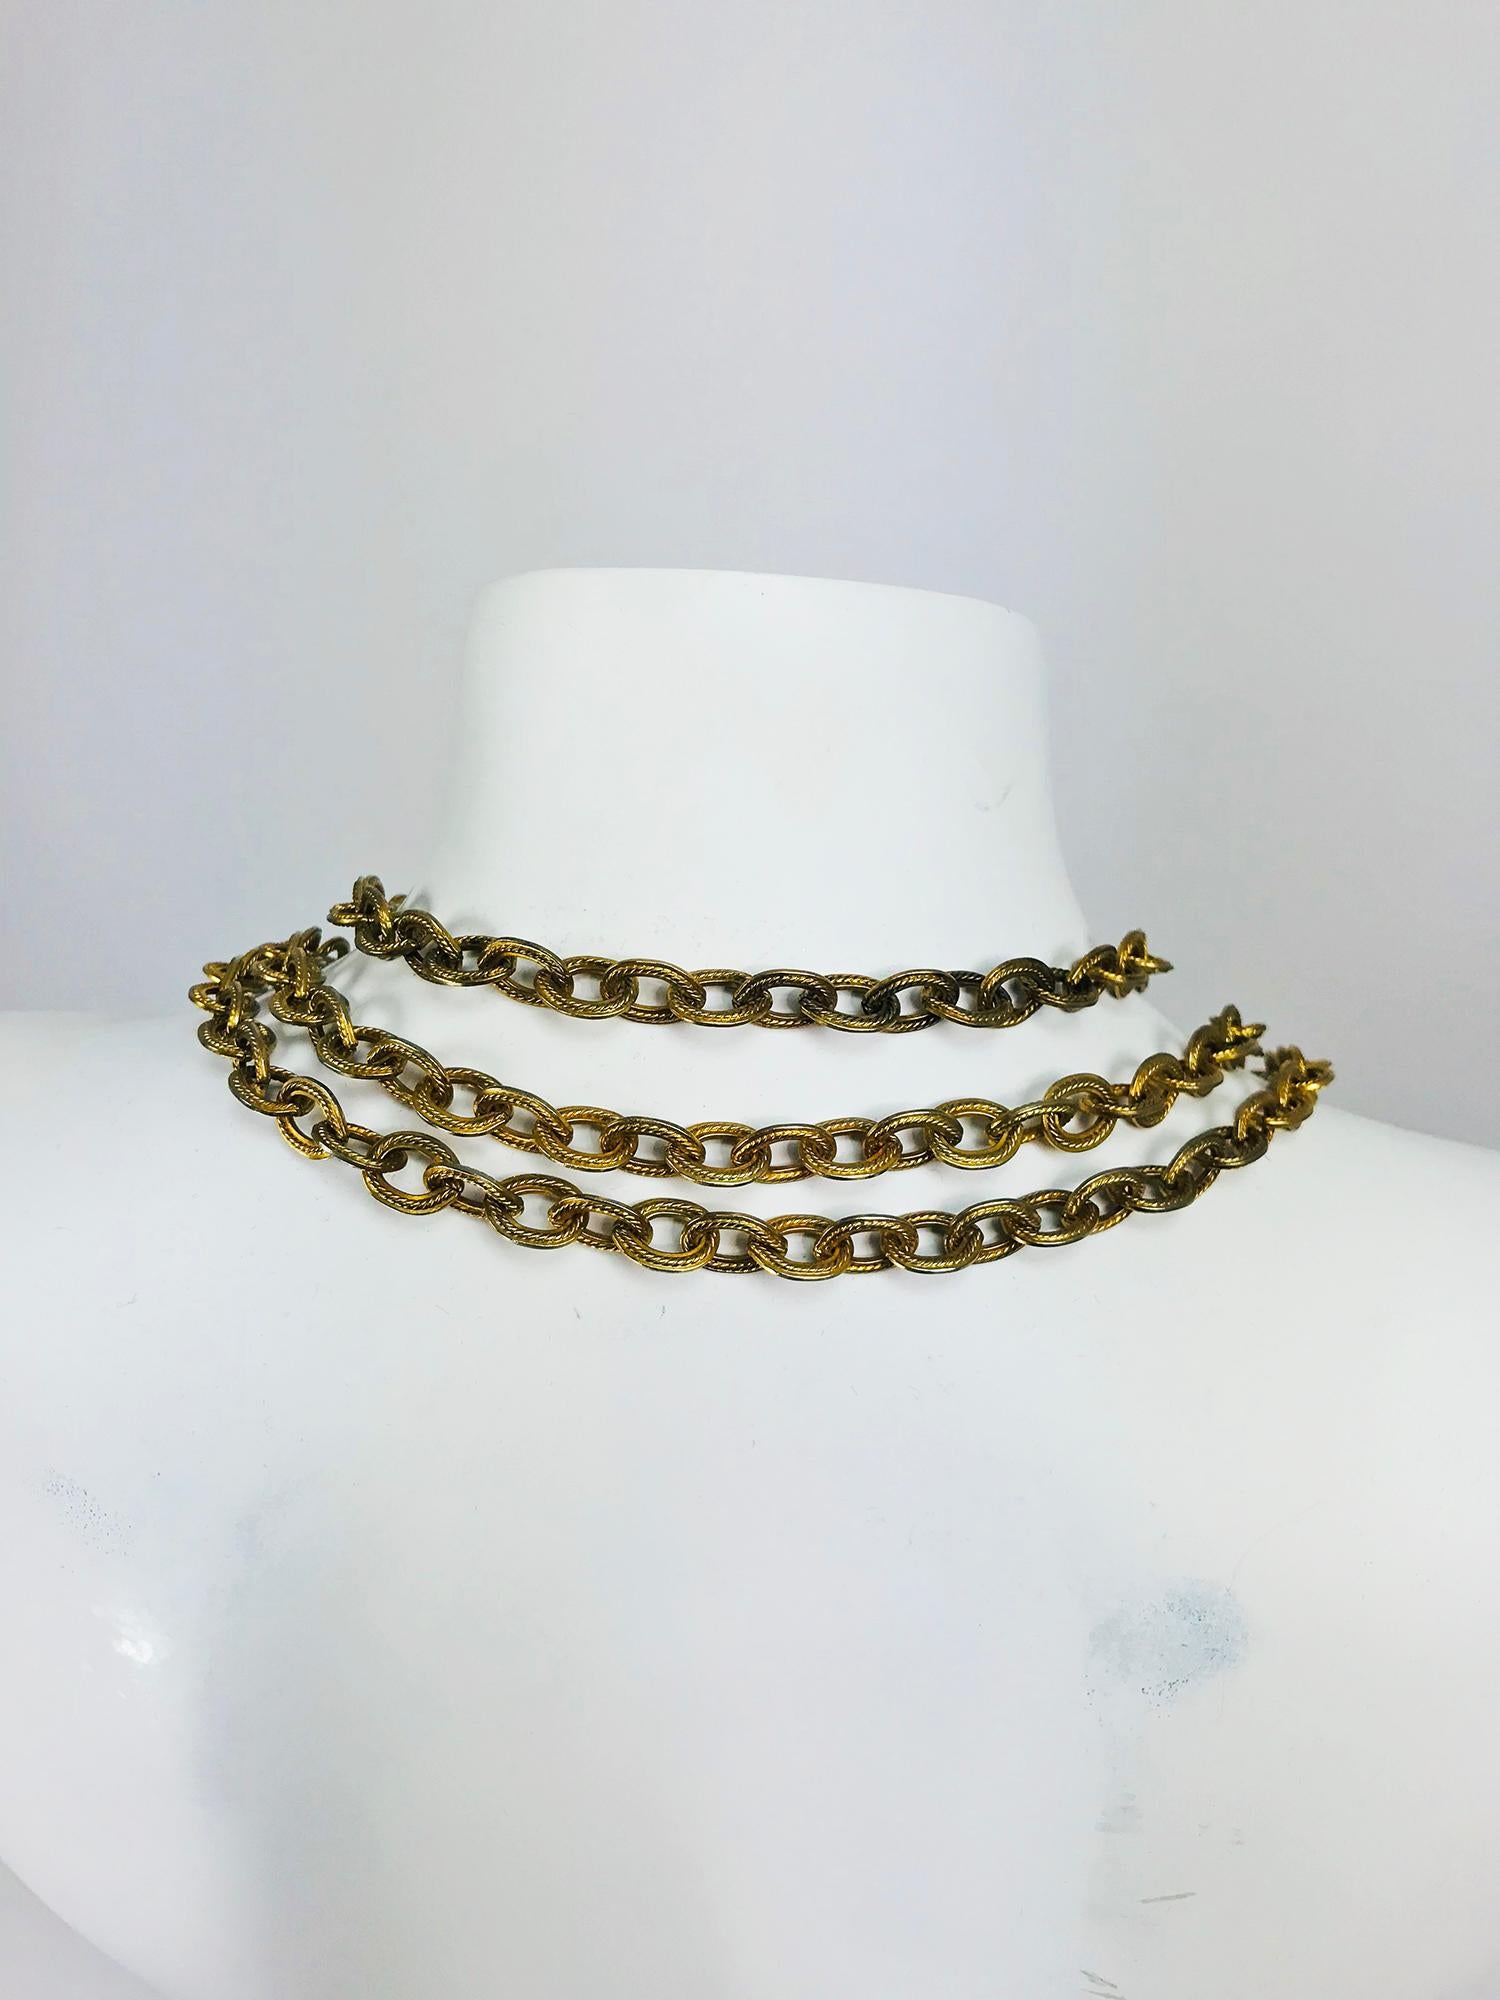 Snake Festoon Necklace in faux Gold and Rhinestone Vintage 1